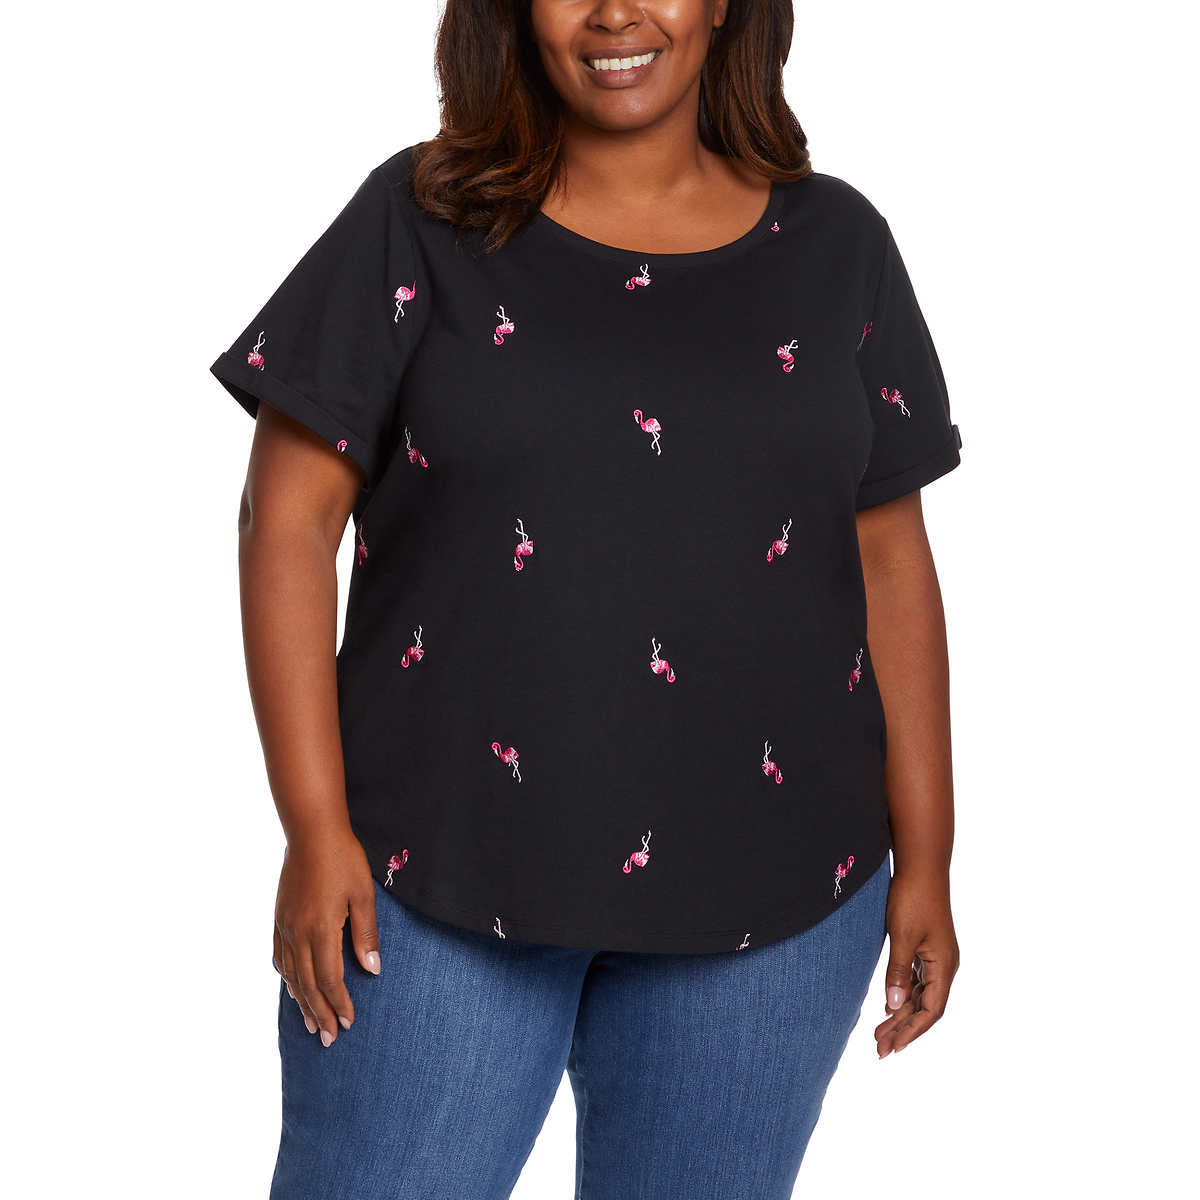 Vintage America Women's Flamingos Embroidered Relaxed Fit Tee Lightweight Cotton Blend T-Shirt